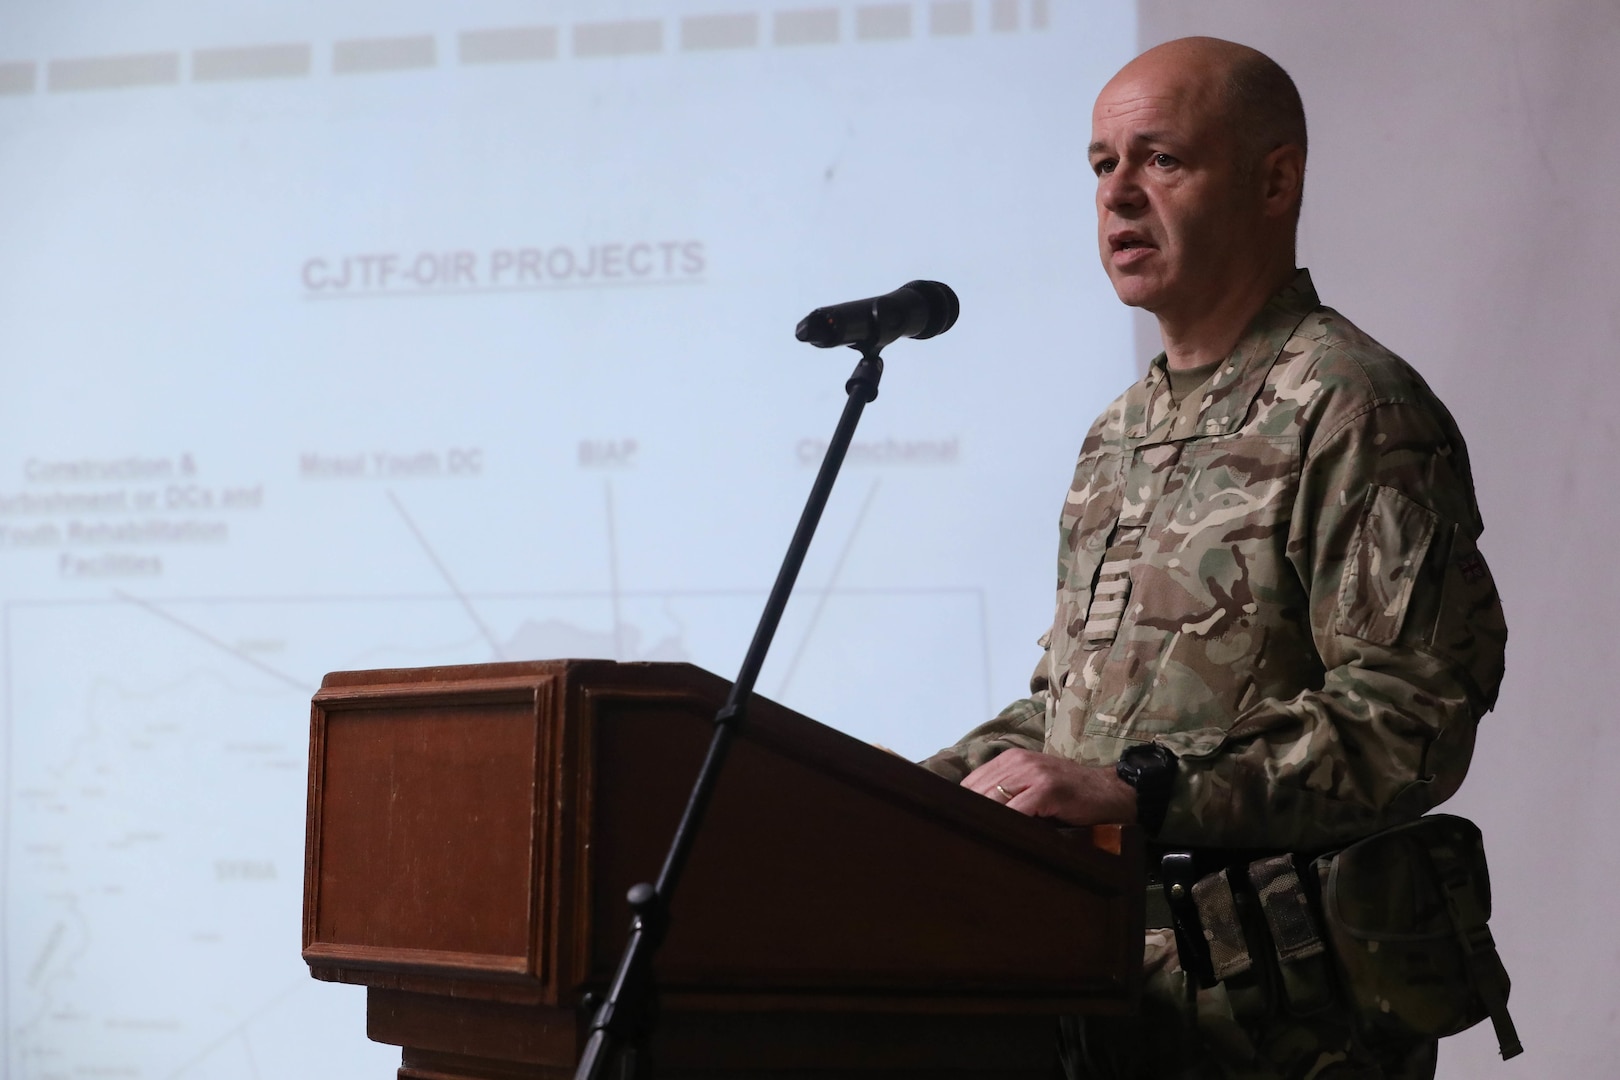 British Gp. Capt. Rob O’Dell, North East Syria Coordination Group director, gives a speech during the Ambassadors Day event at Union III forward operating base in Baghdad, Iraq, April 21, 2022. During the CJTF-OIR-hosted event, representatives from more than 25 Coalition countries discussed the CJTF-OIR mission and broad efforts to tackle enduring regional security and stability challenges. (U.S. Army photo by Staff Sgt. Bree-Ann Ramos-Clifton)